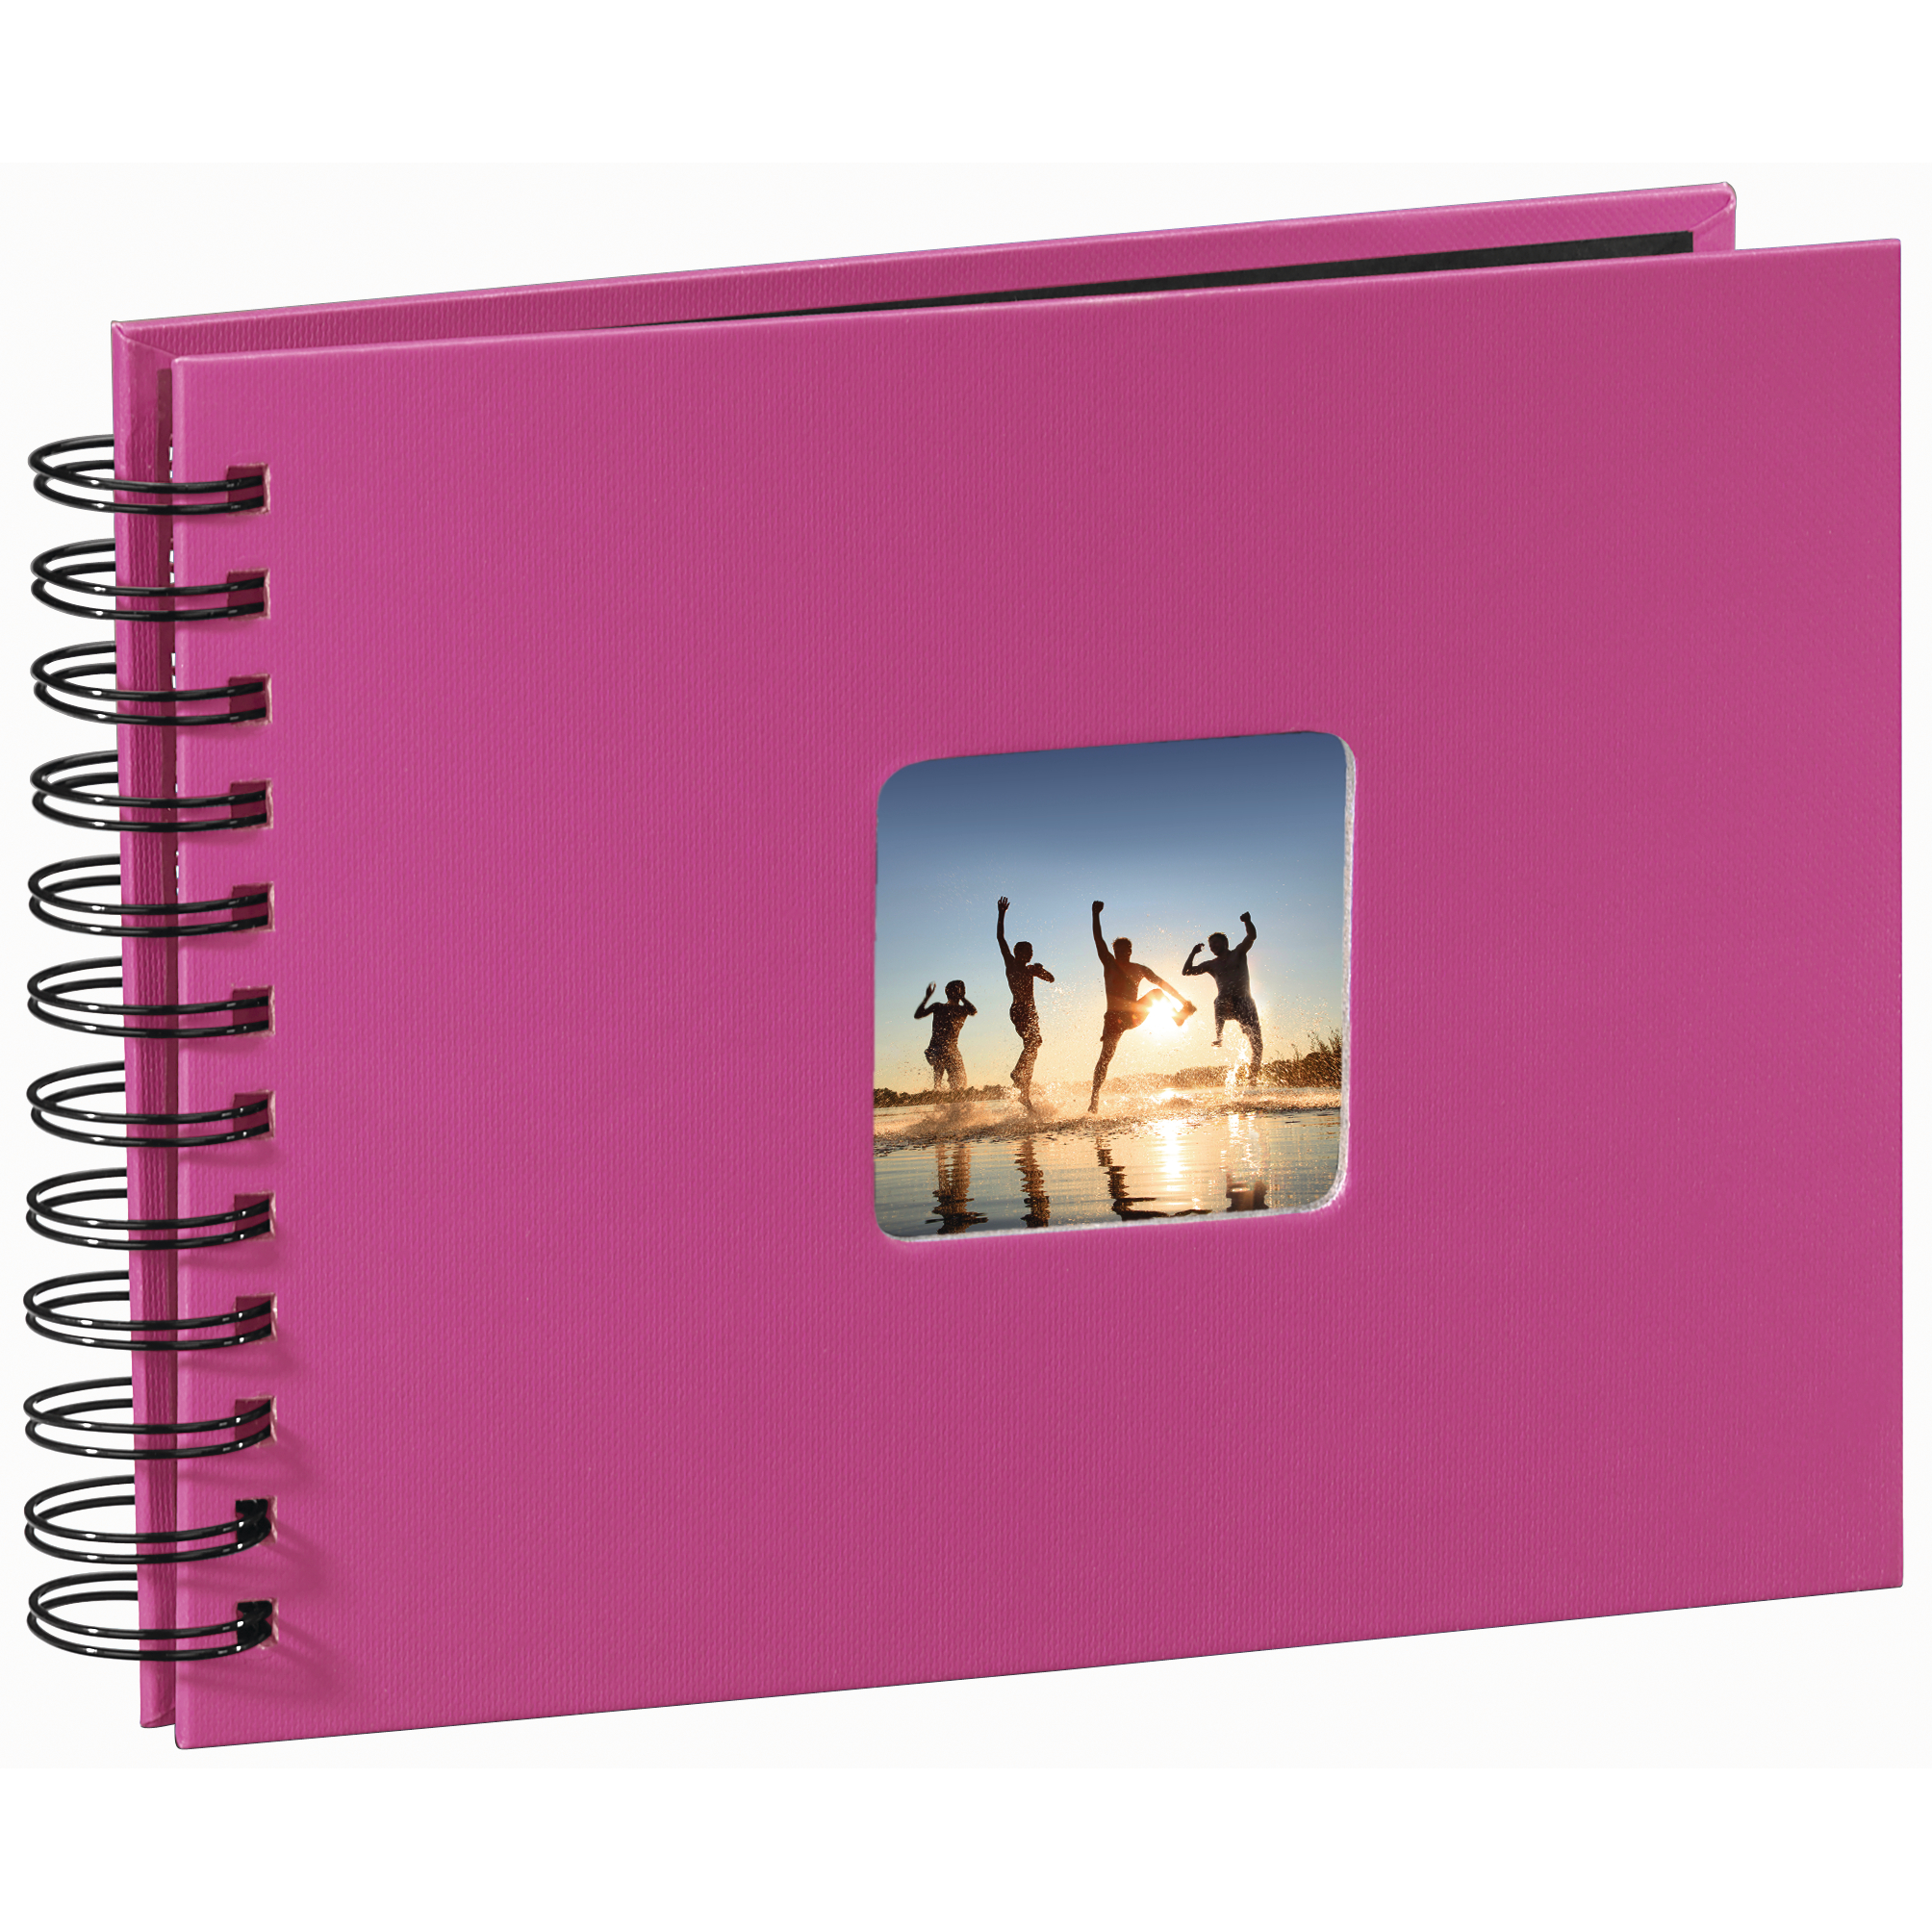 HAMA Album Fine Art 113674 240x170mm, pink 25 pages 240x170mm, pink 25 pages